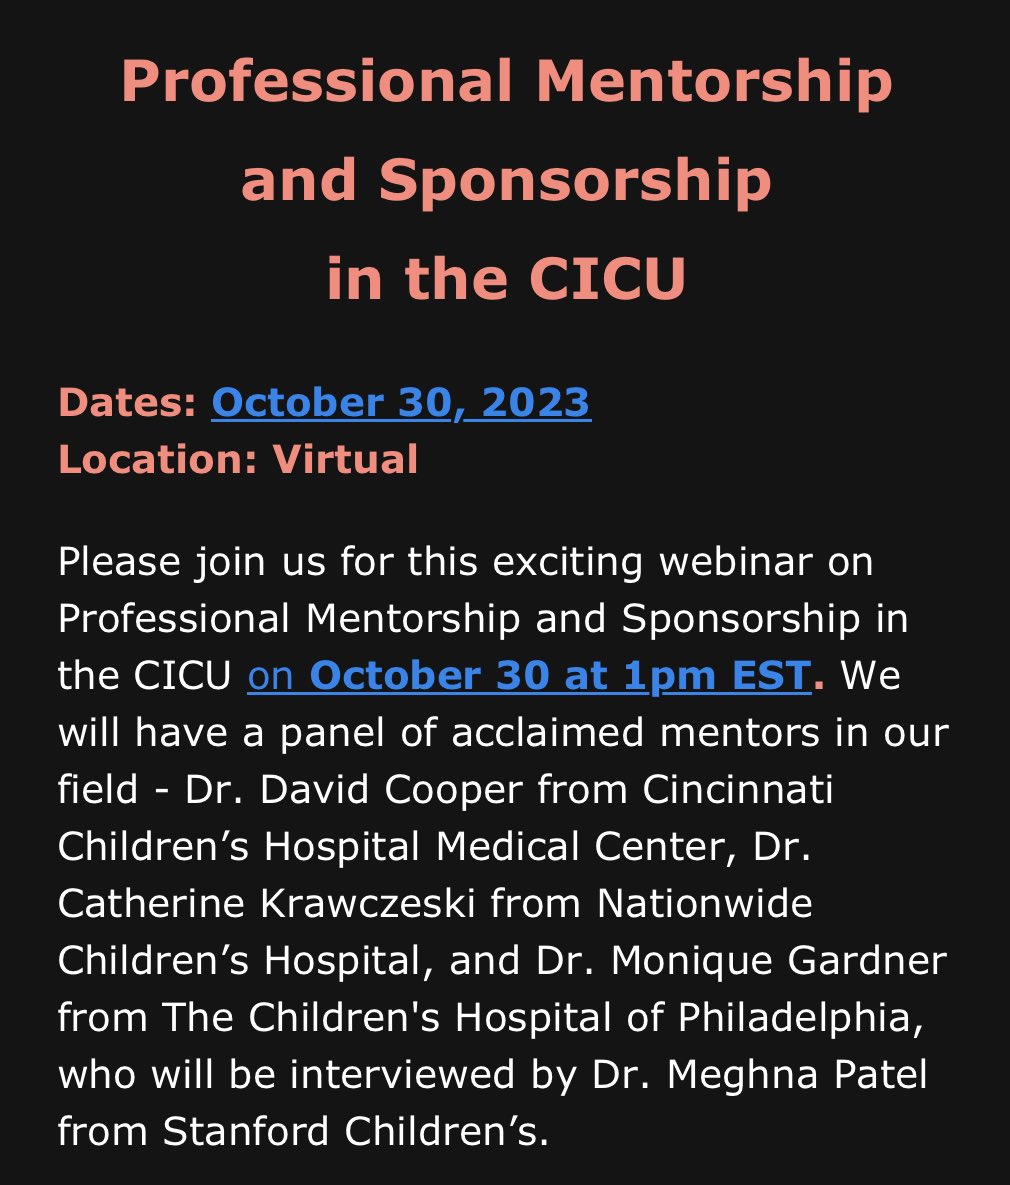 Join us for this exciting webinar on 10/30 at 1pm EST. Register here …ntensivecaresociety.growthzoneapp.com/ap/Events/Regi…